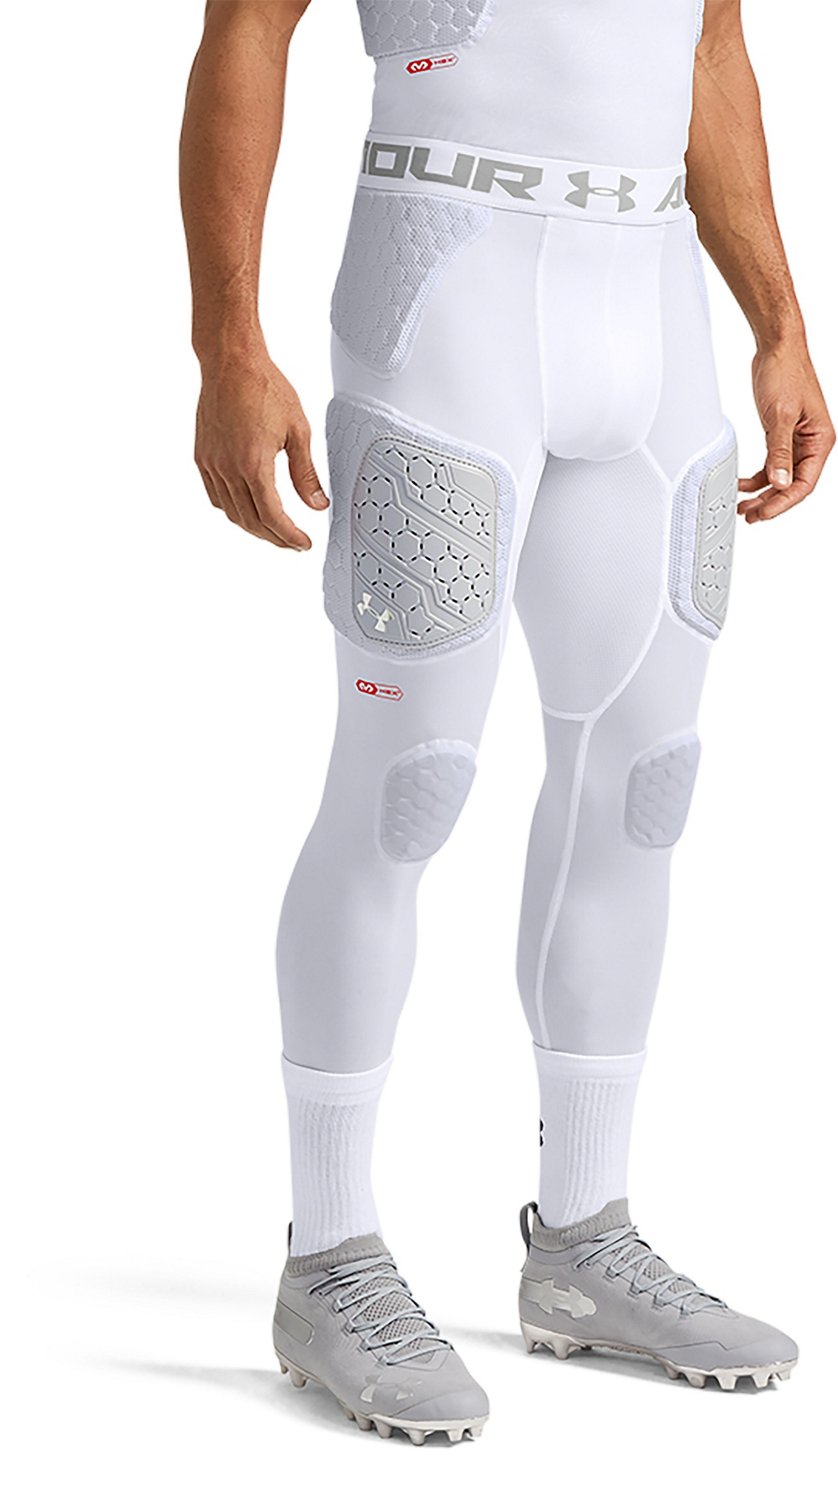 Under Armour Adults Gameday Armour Pro 7-Pad 3/4-Length Tights